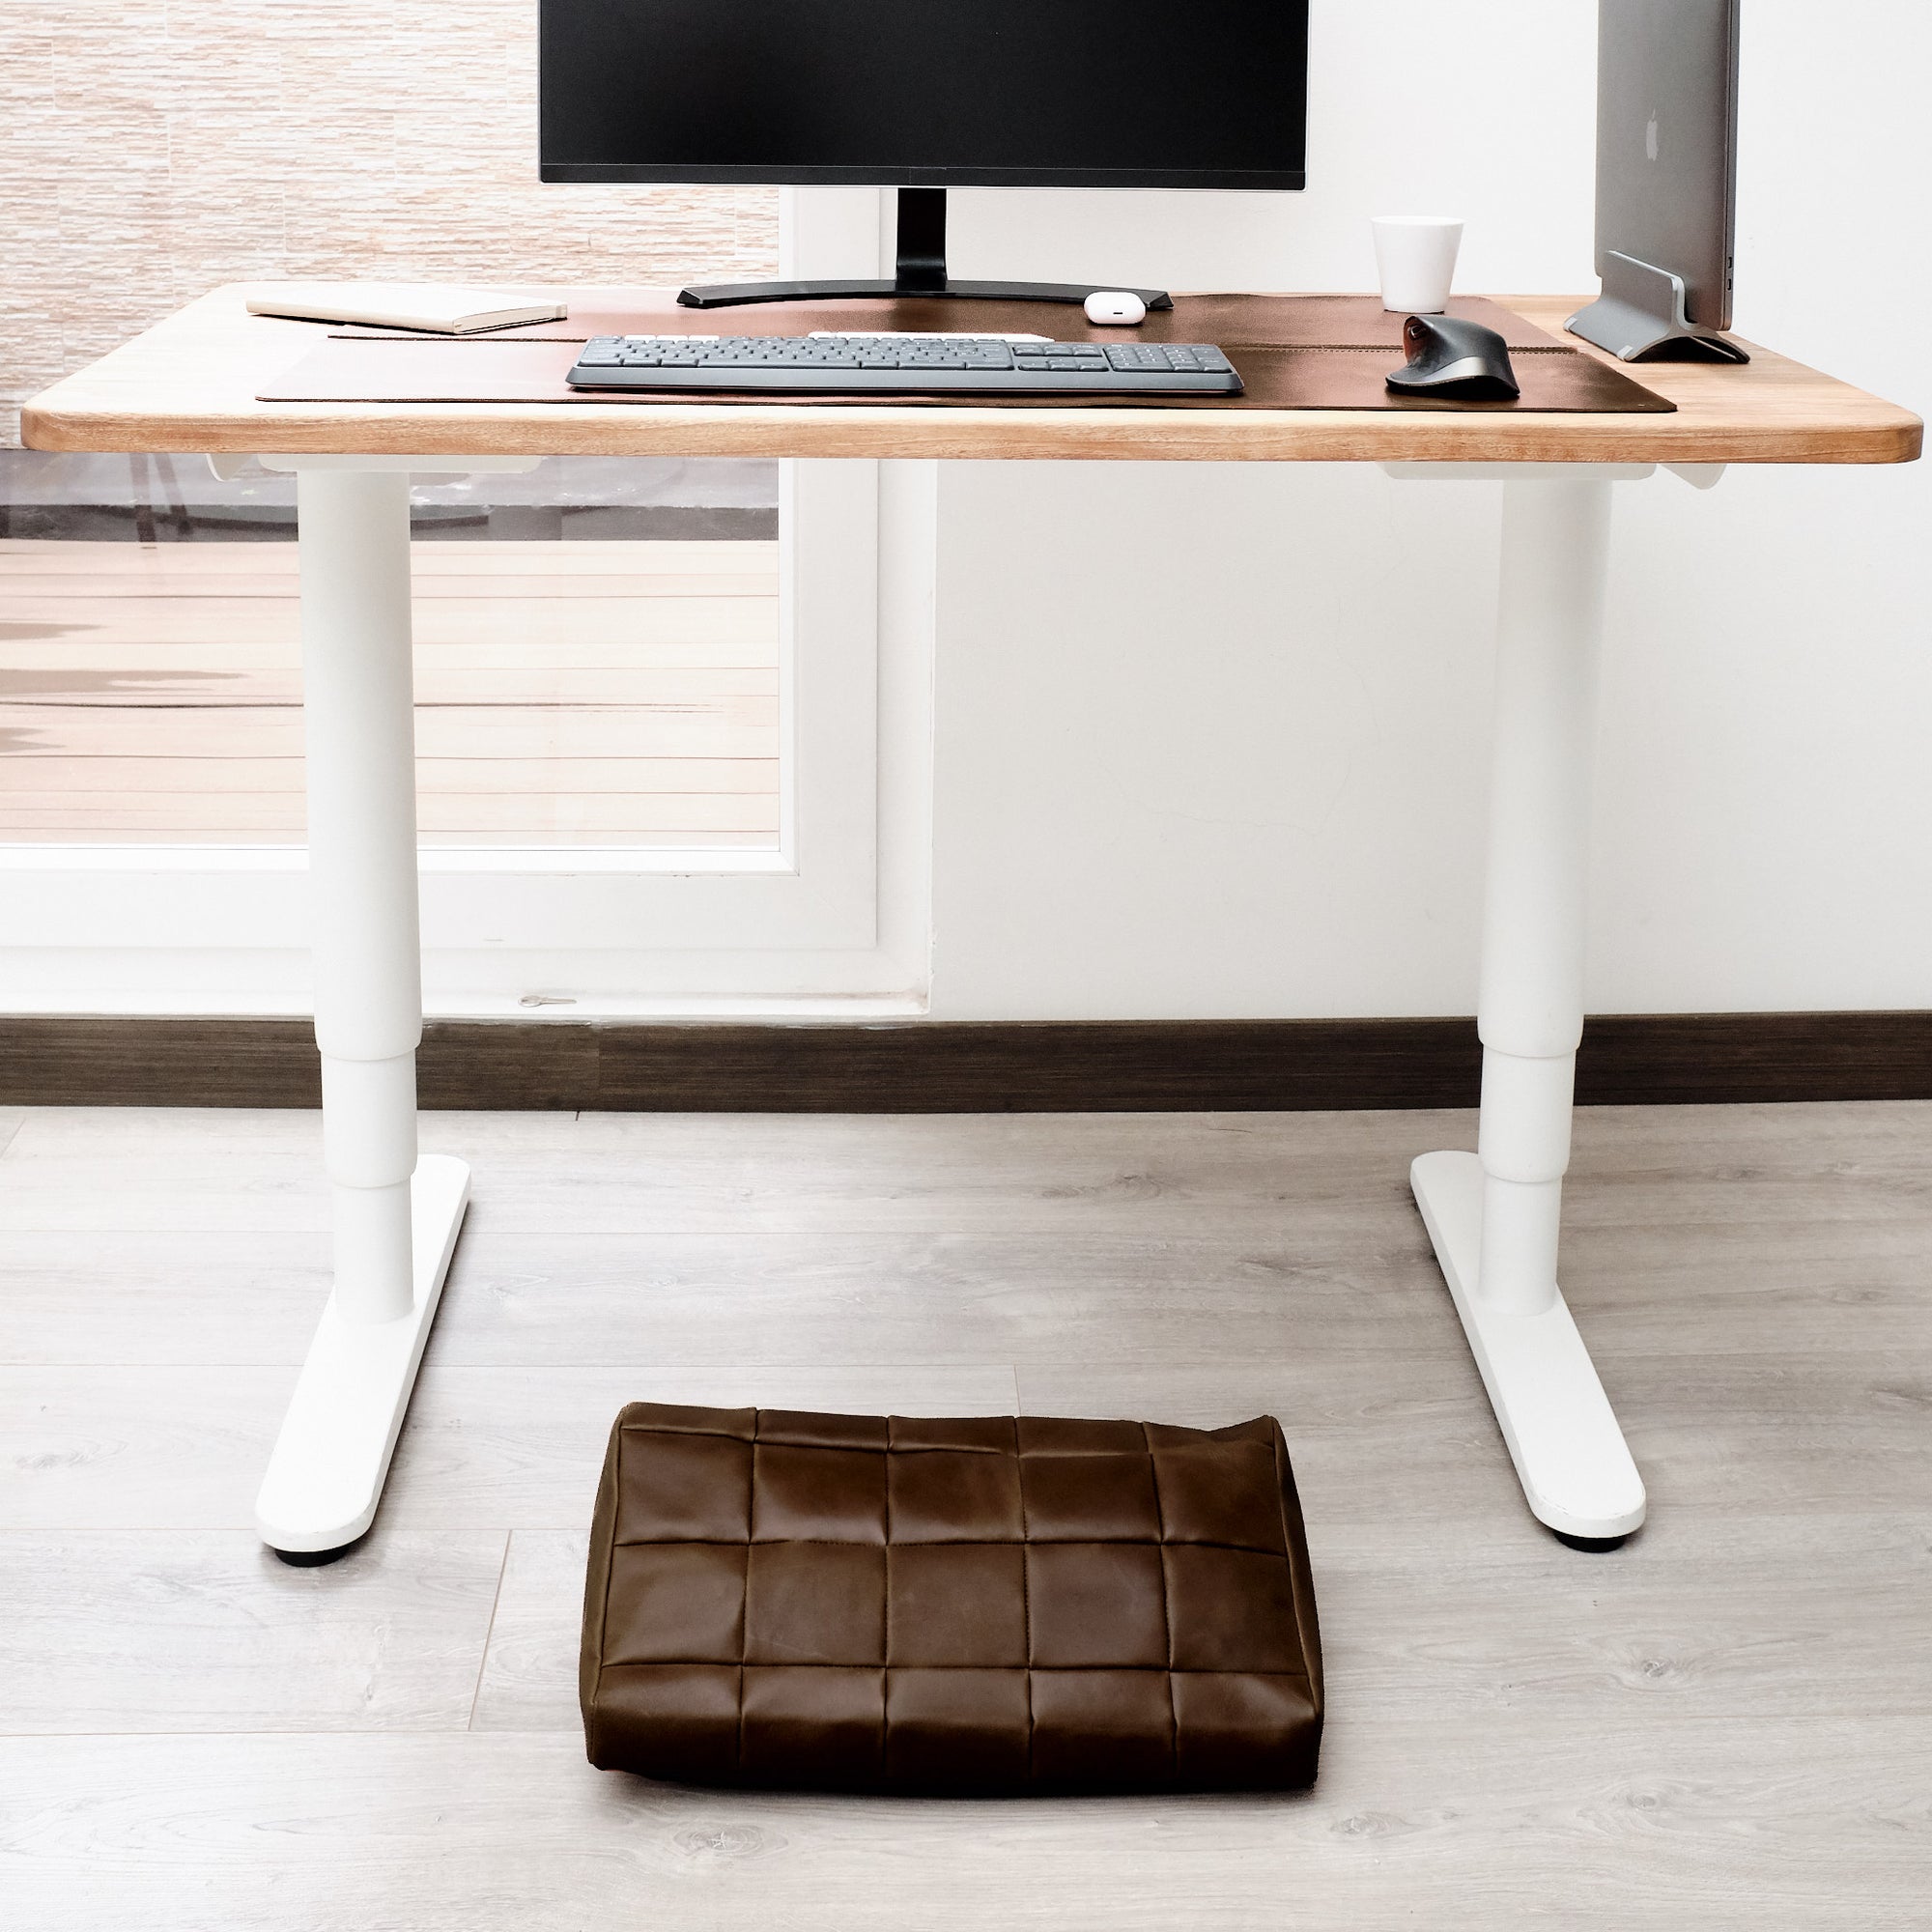 Home Office. Ergonomic under desk footrest cover in brown by Capra Leather